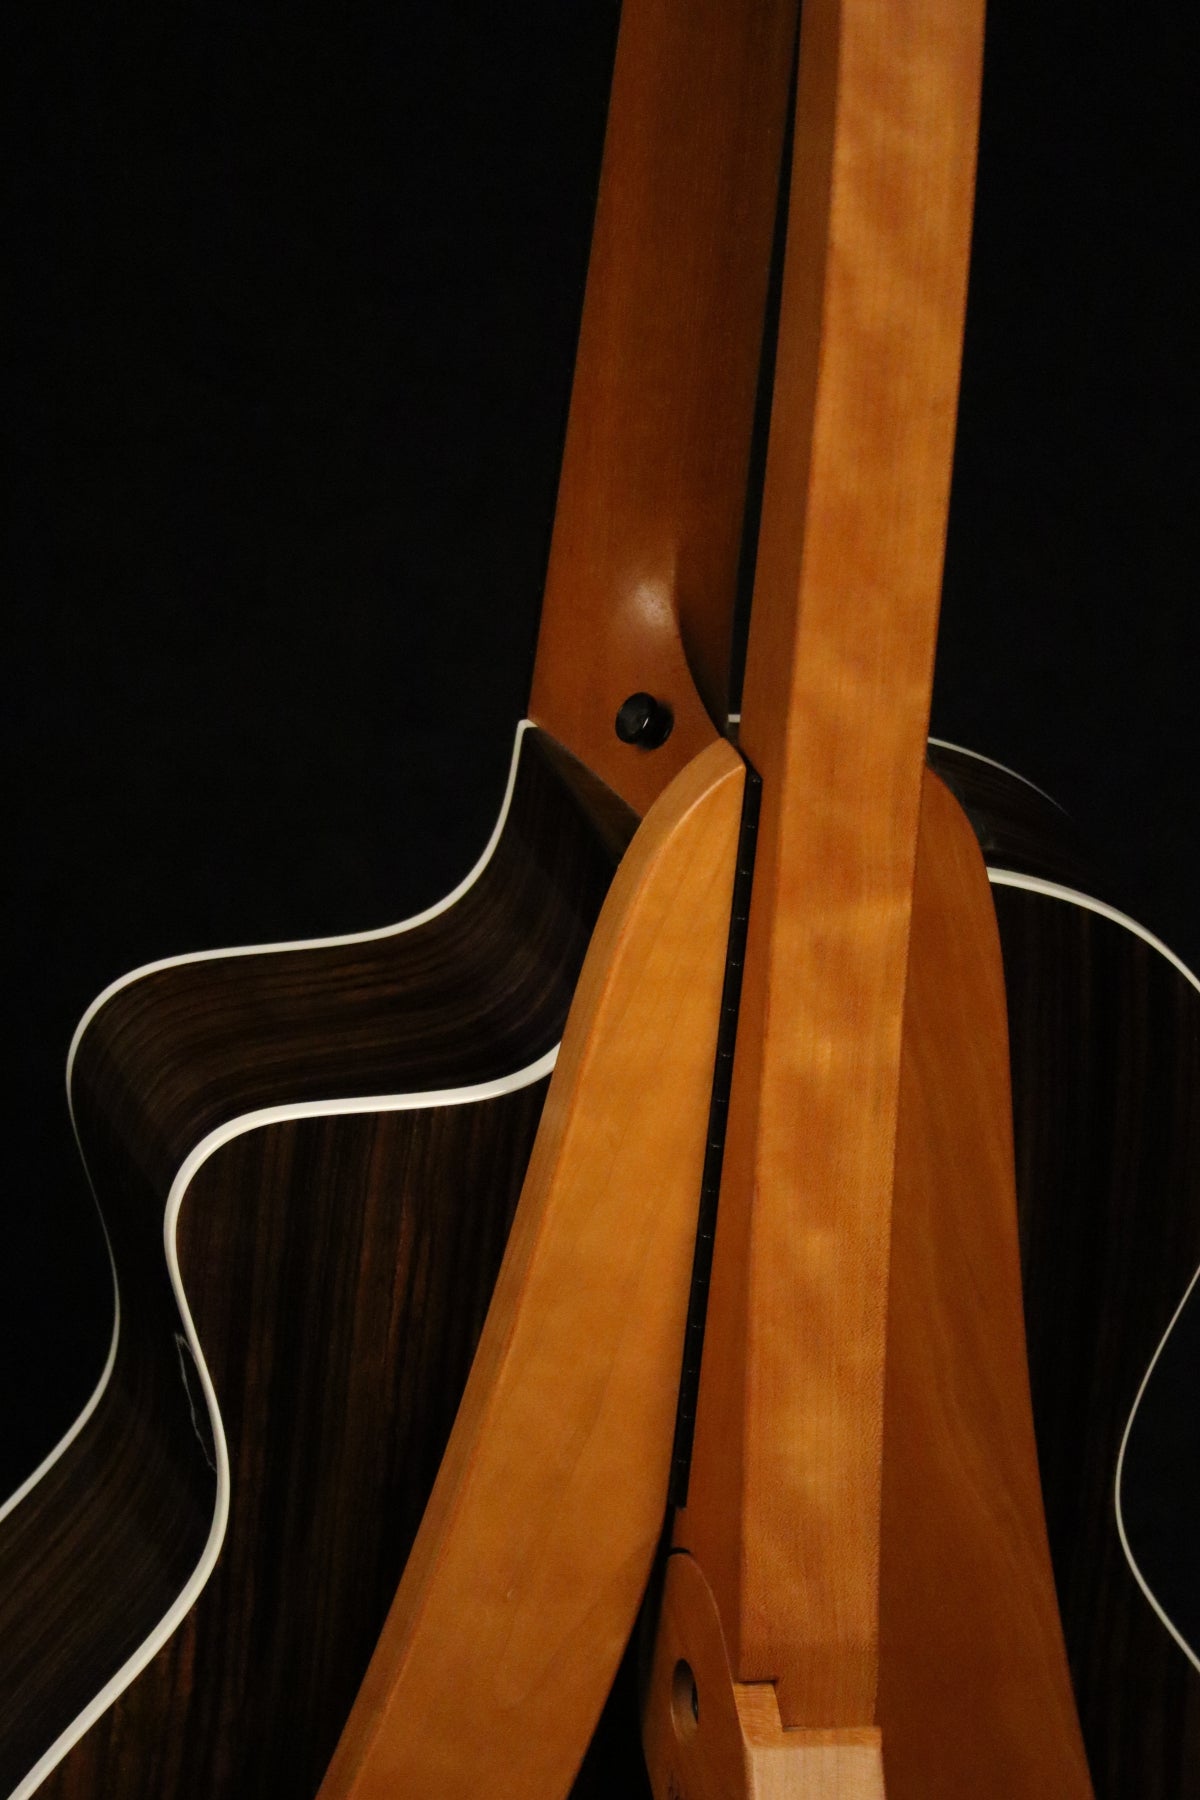 Folding cherry wood guitar floor stand closeup rear image with Taylor guitar